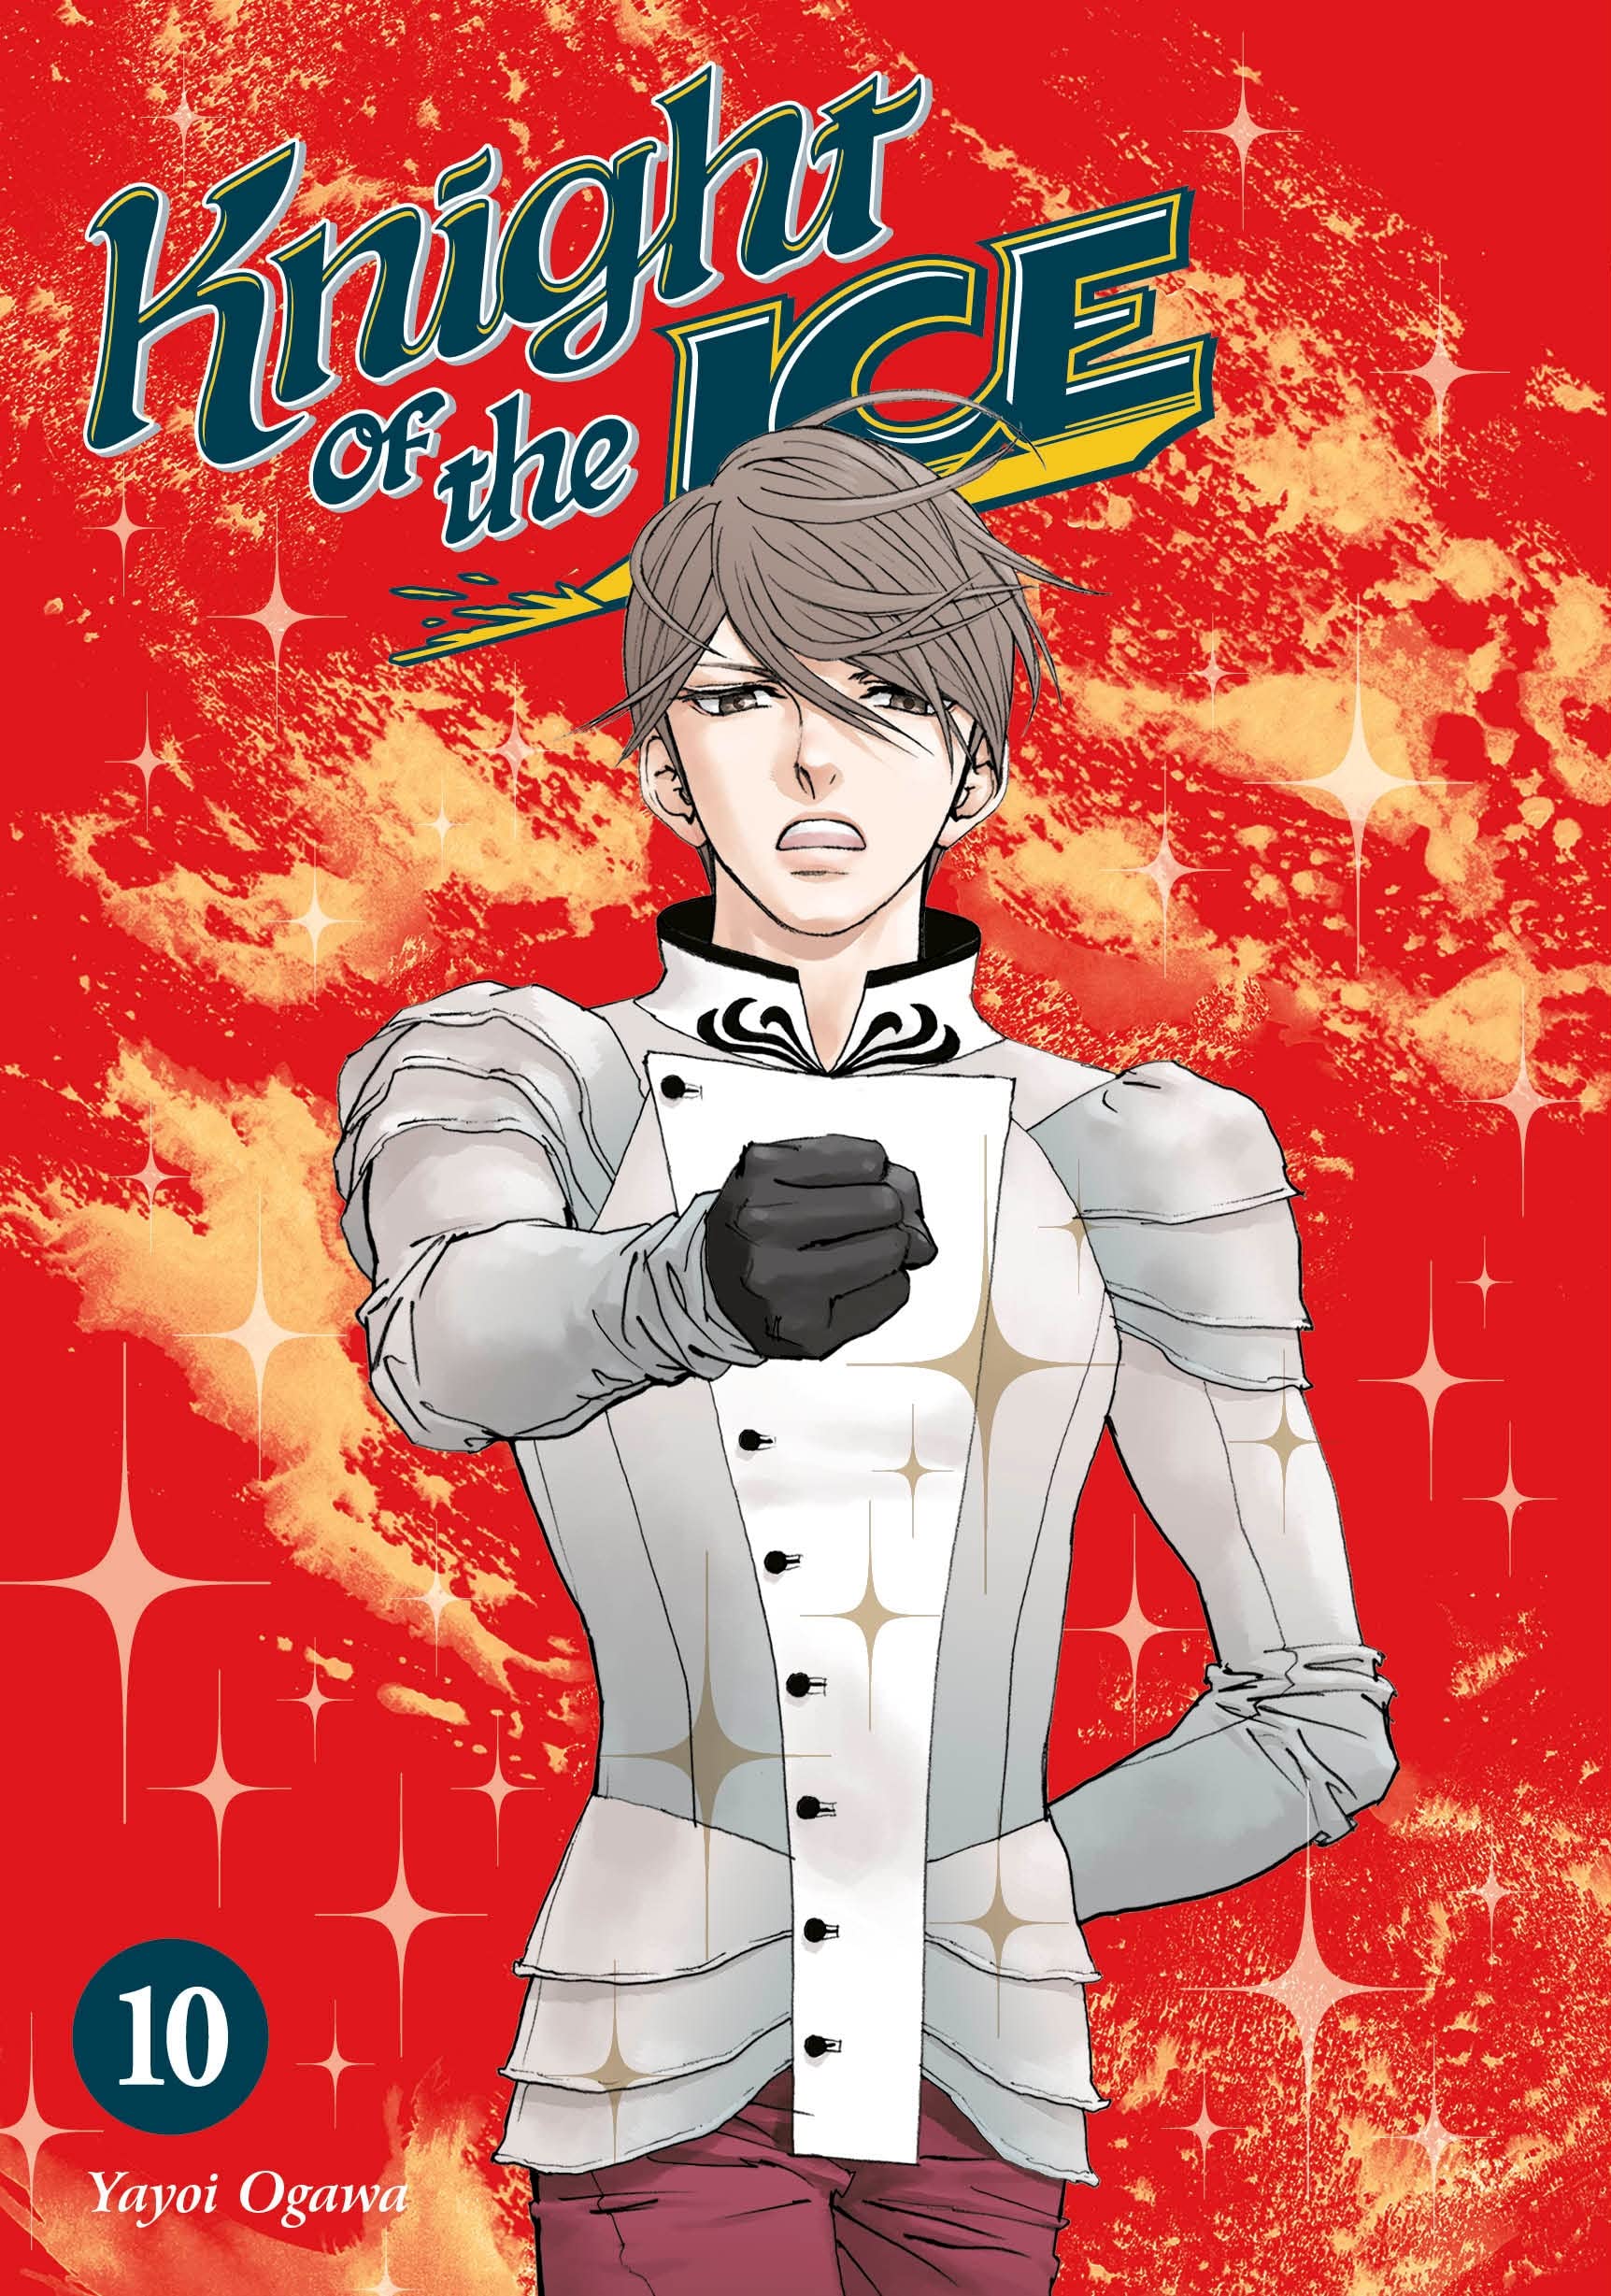 Knight of the ice - Volume 10